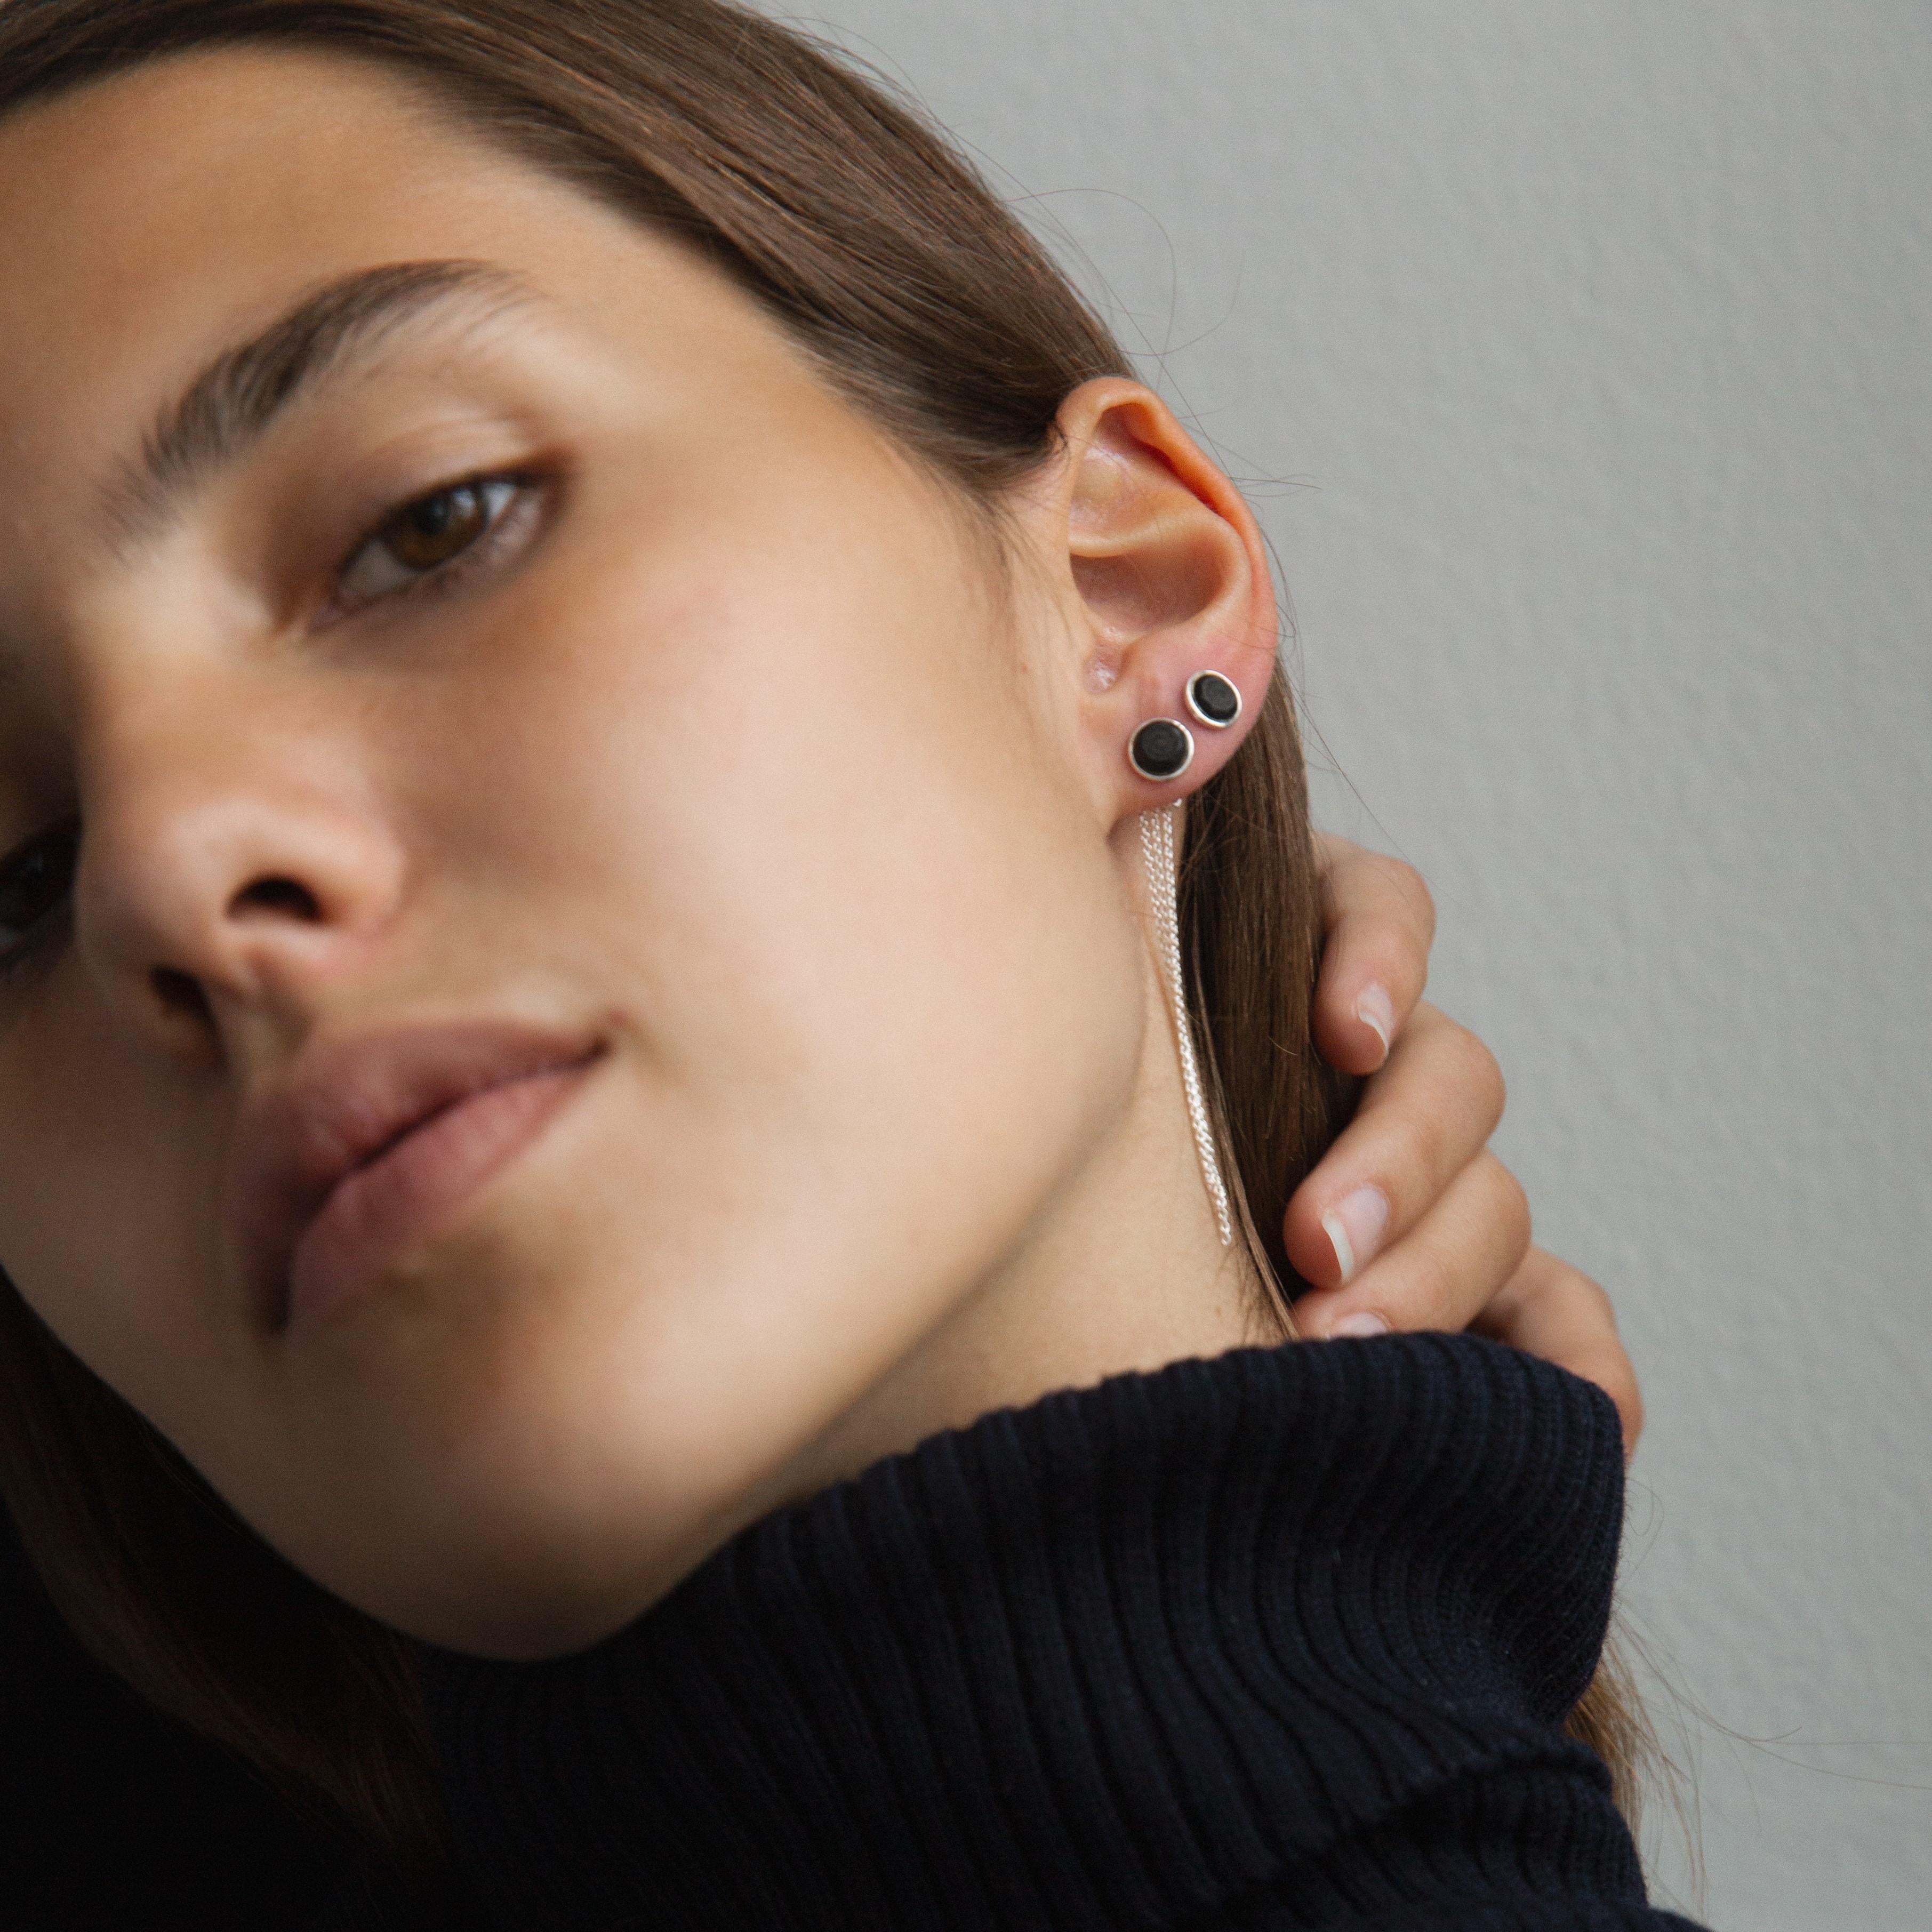 Also available in recycled 18k gold and as one piece earring.

A pair of I TASTE earrings in solid, recycled sterling silver. These lovely earrings are adorned with a sustainable, brilliant-cut Mpingo Blackwood diamond and three lively silver